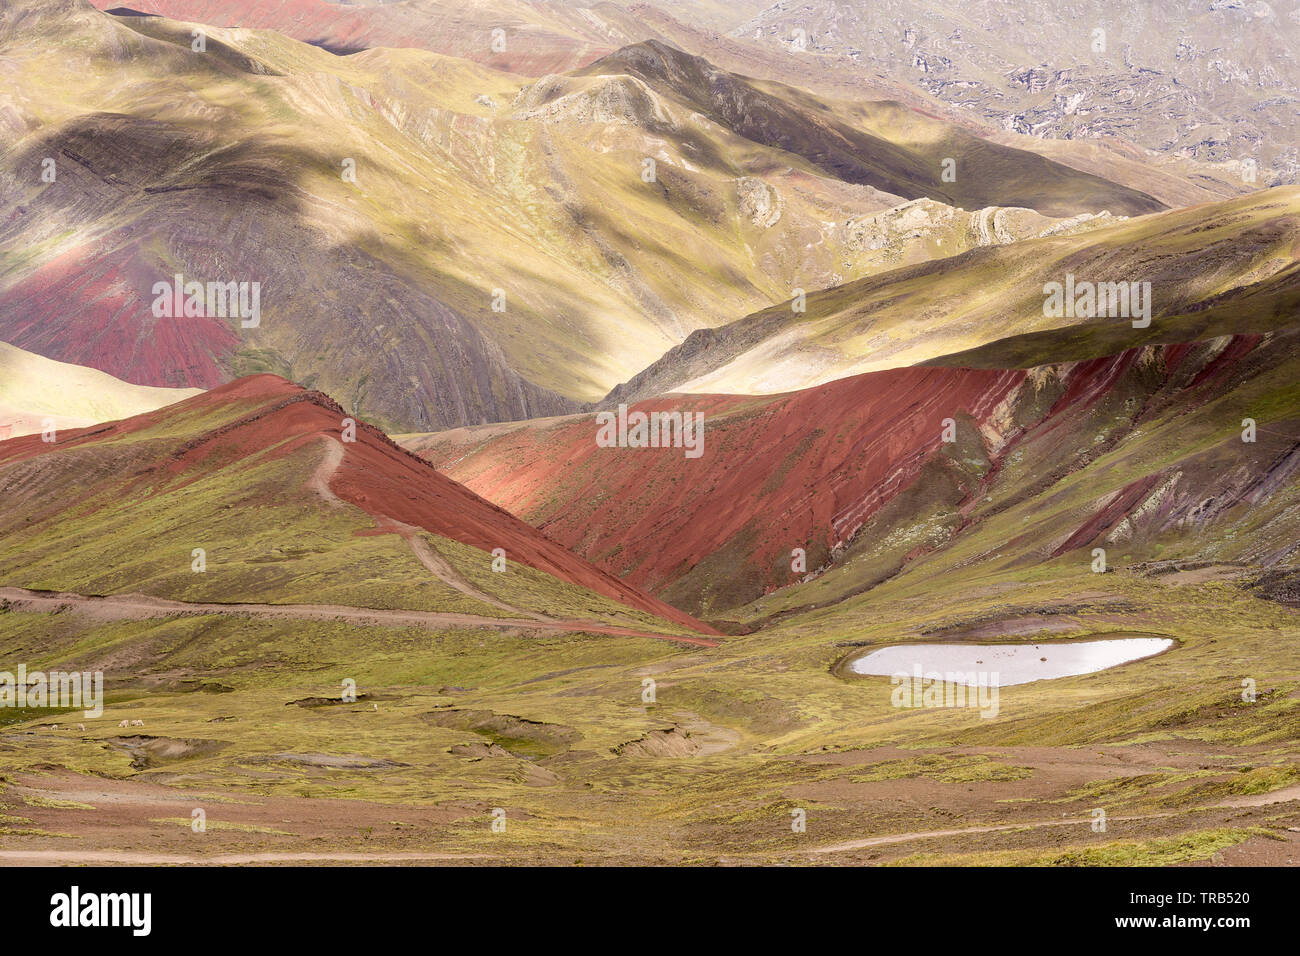 Peru Palccoyo Mountain (alternative Rainbow Mountain) - View of the slopes of the colorful Palccoyo Mountain in Peru, South America. Stock Photo